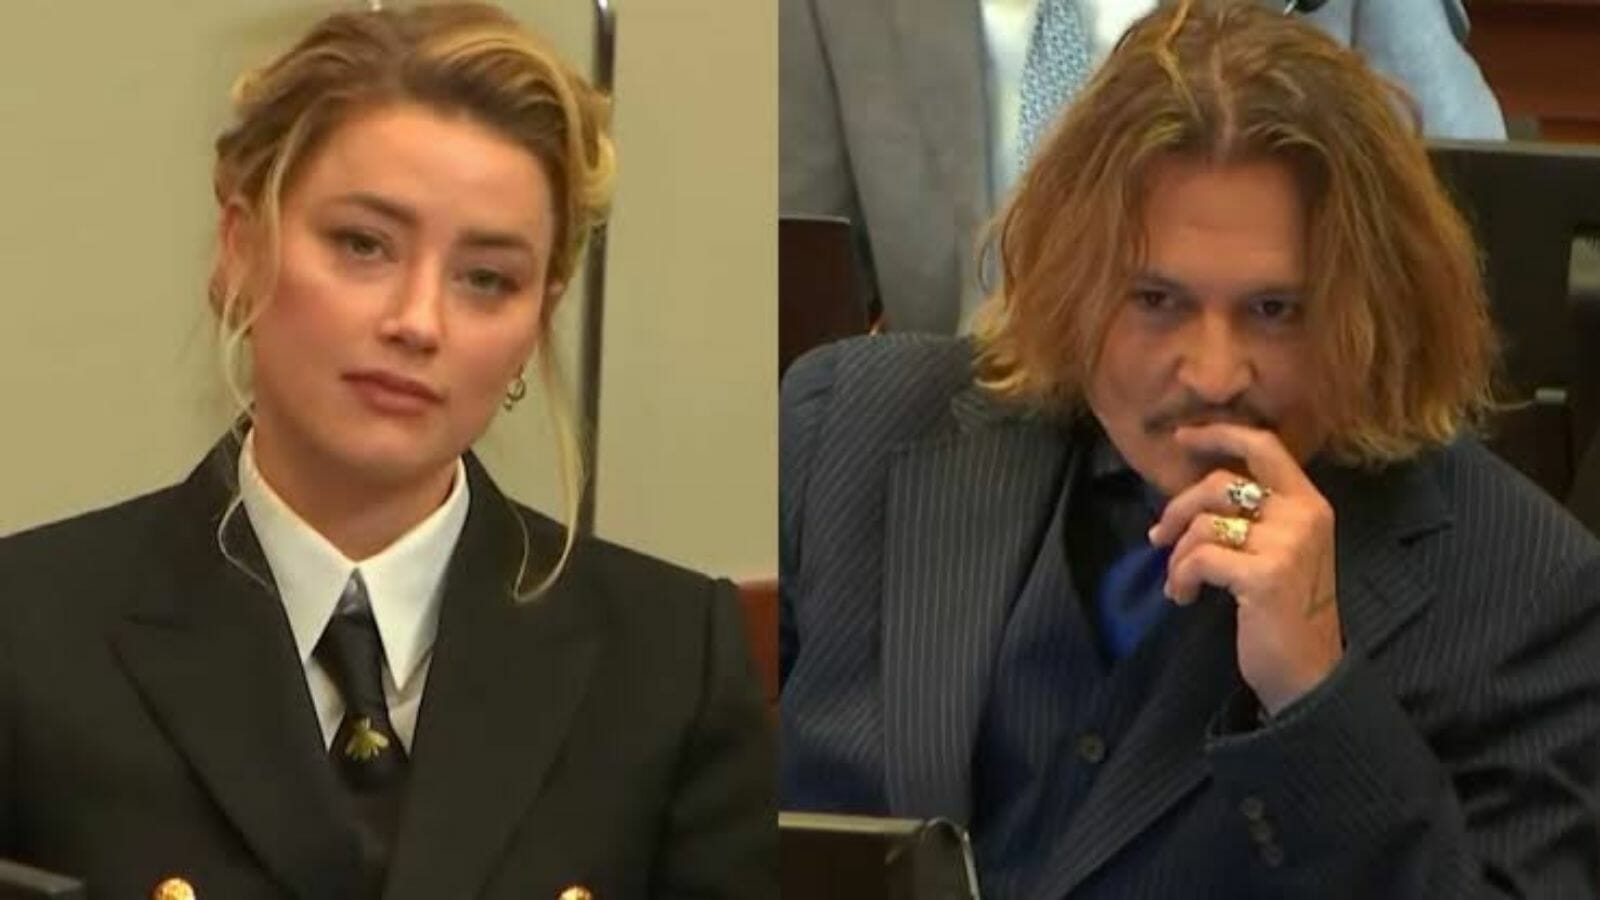 Amber Heard and Johnny Depp in the courtroom